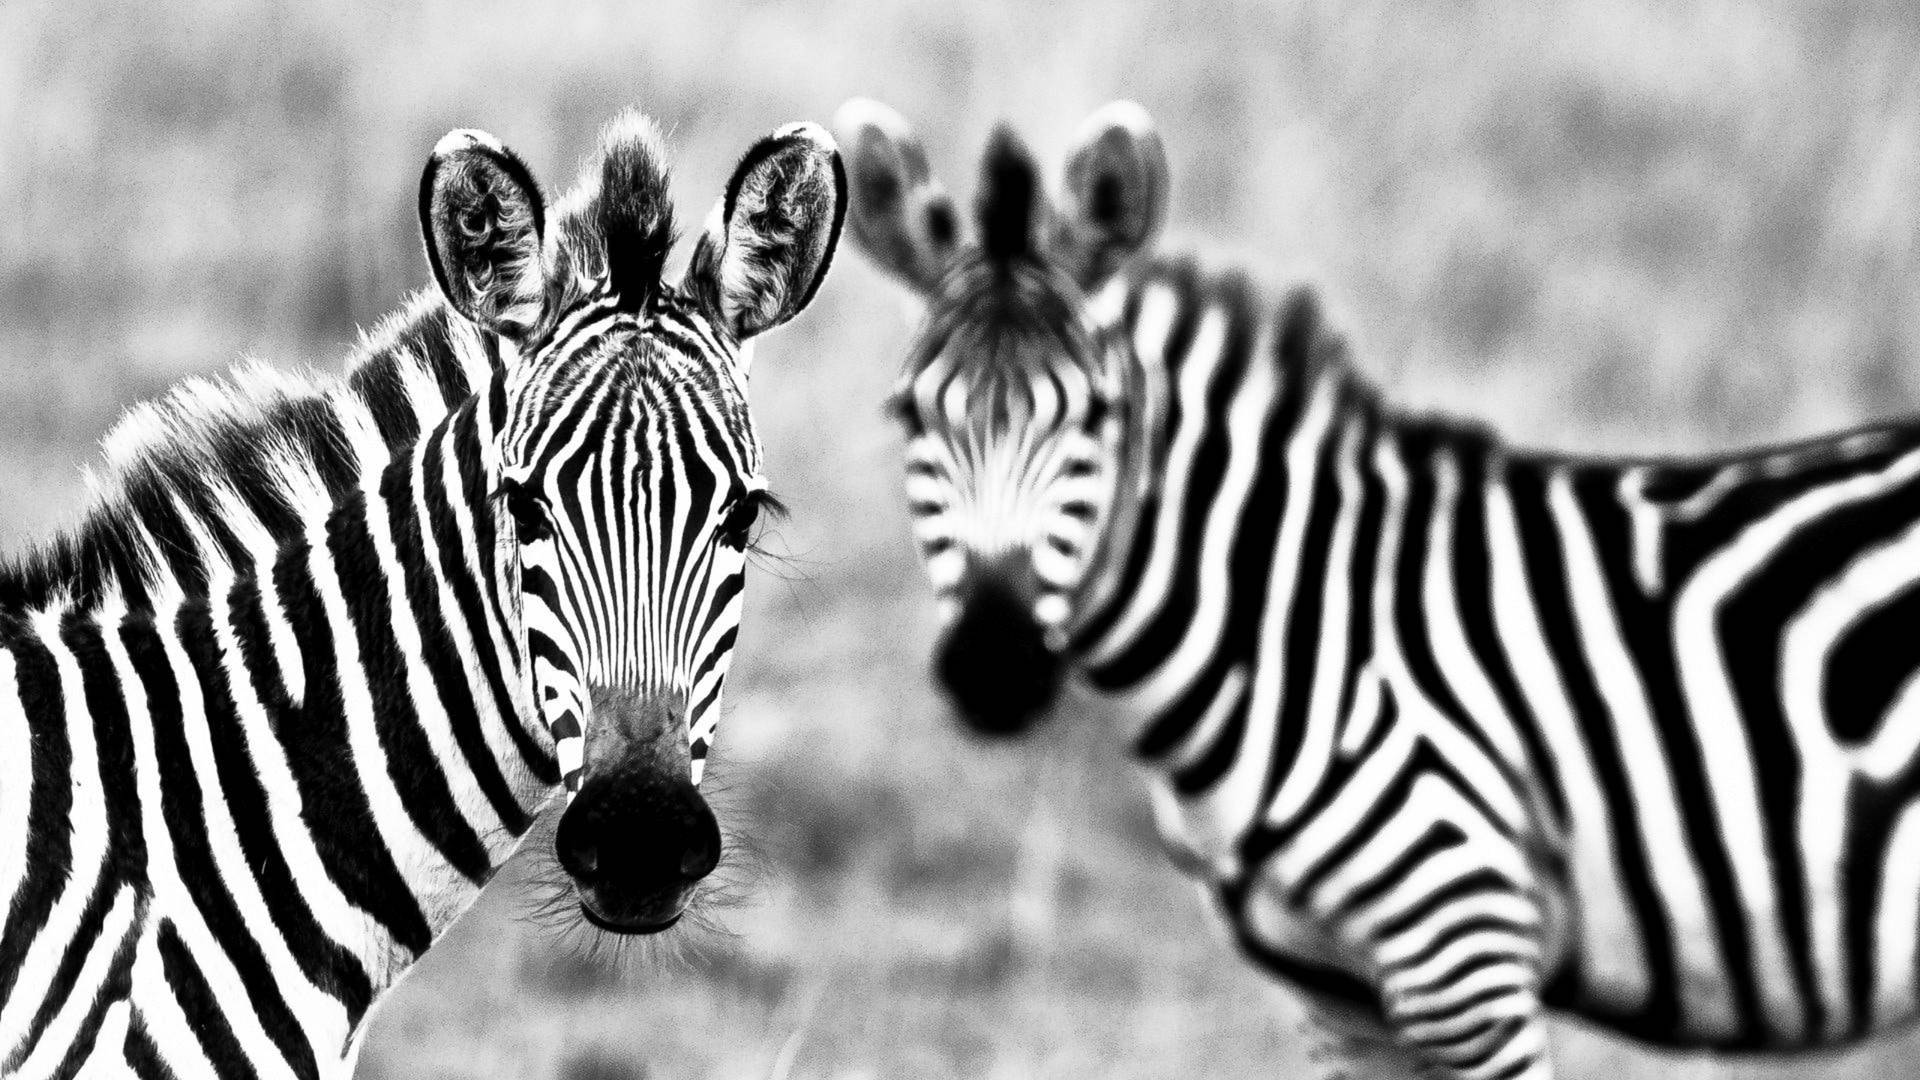 Two Zebras In Black And White Background